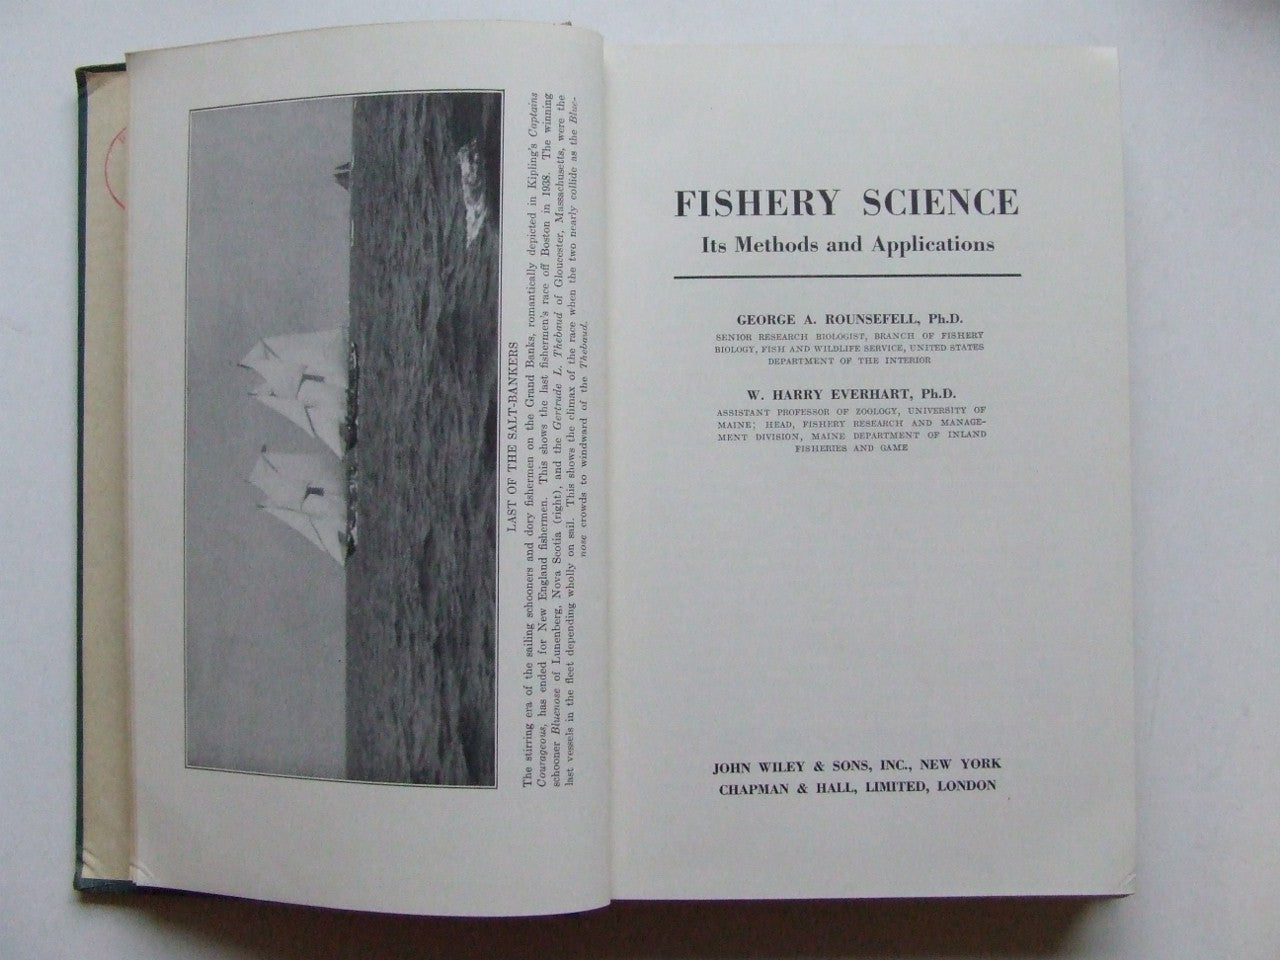 Fishery Science, its methods and applications